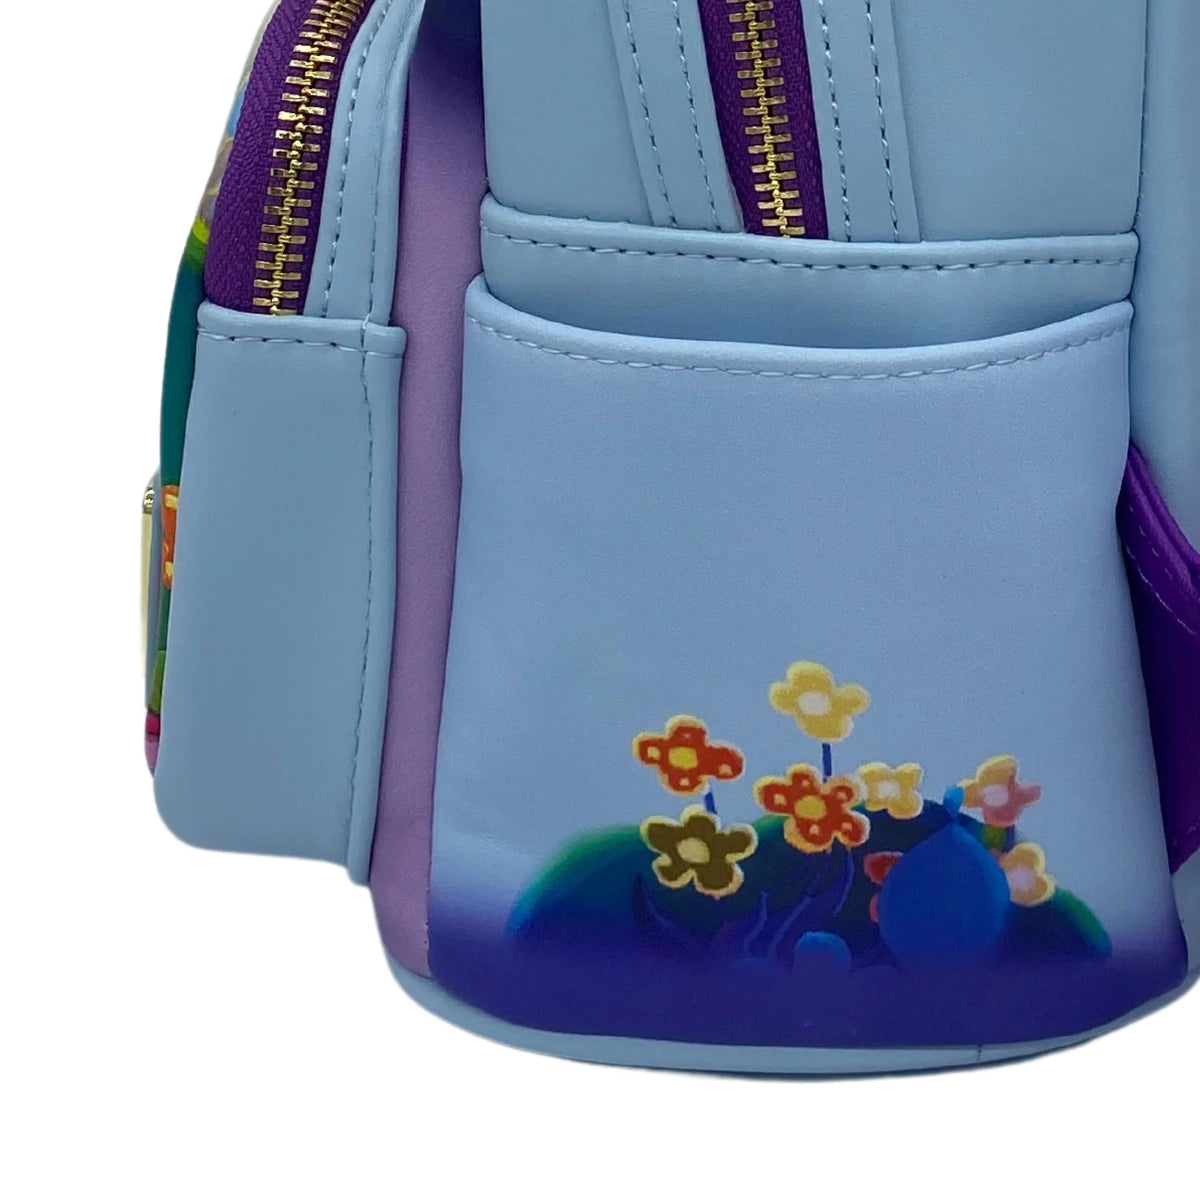 PIXAR INSIDE OUT LOUNGEFLY MINI BACKPACK